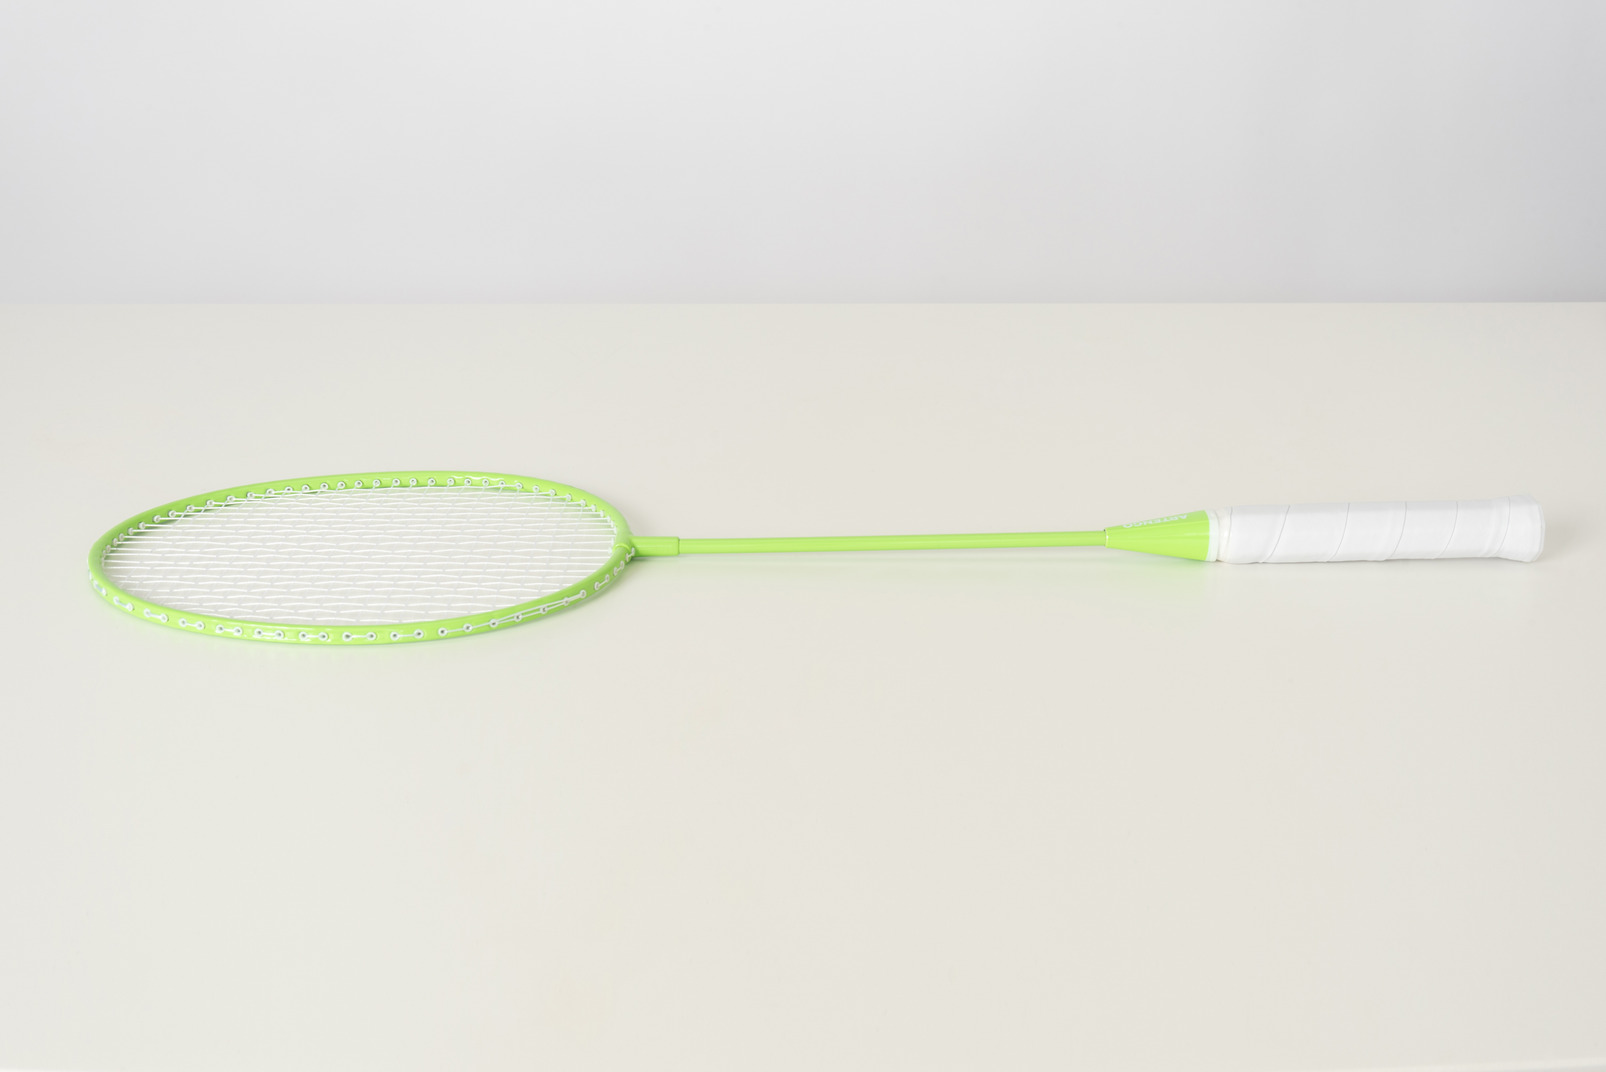 Green tennis racket on a white background